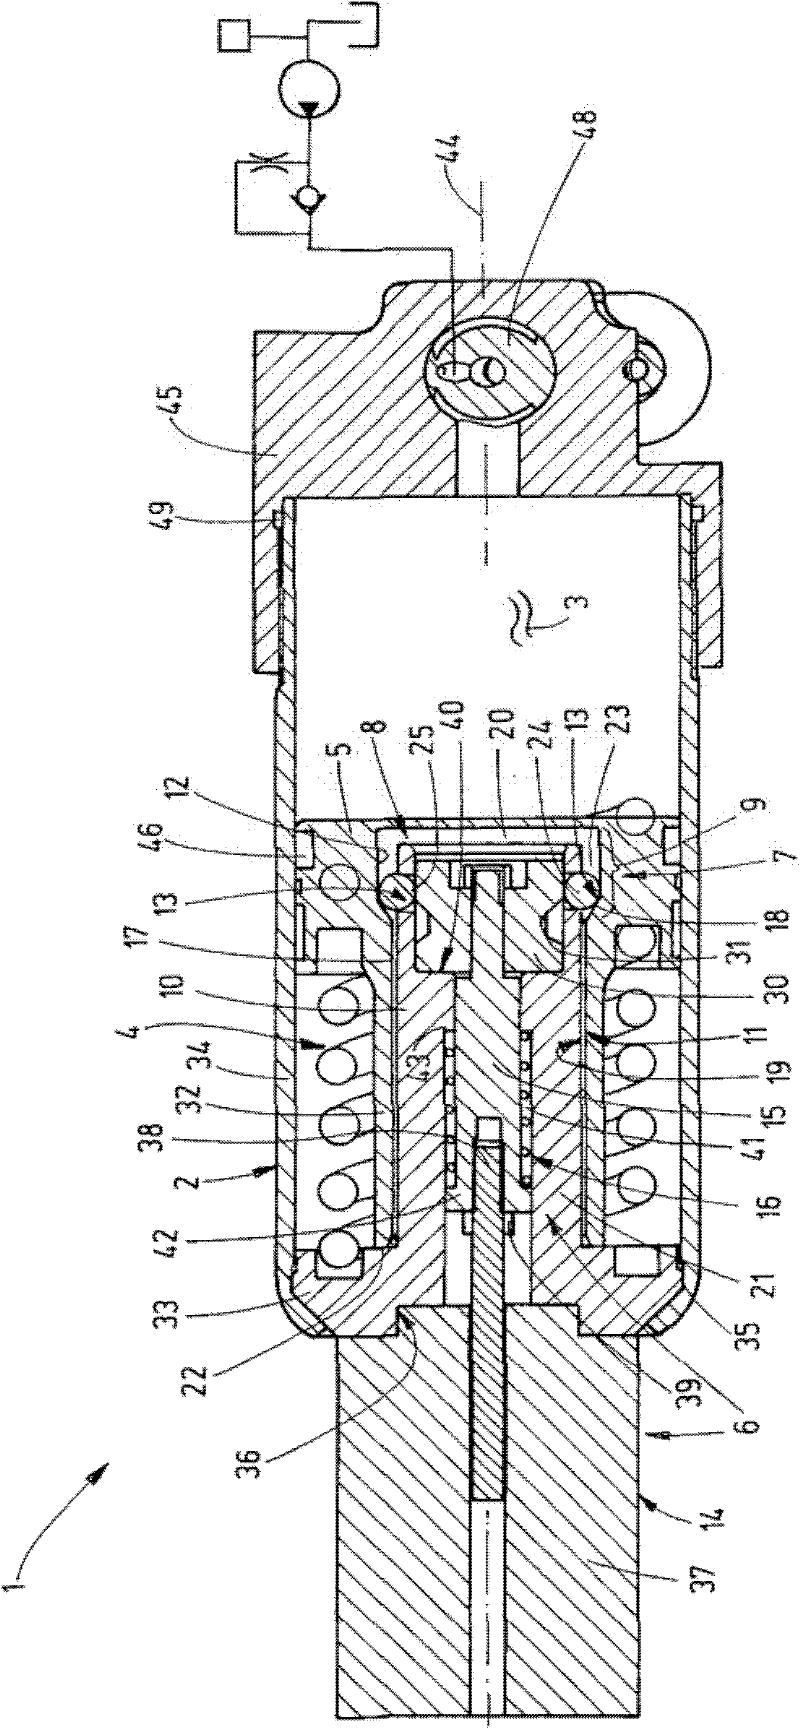 Device for the pulsed release of an amount of fluid which can be stored in an accumulator housing